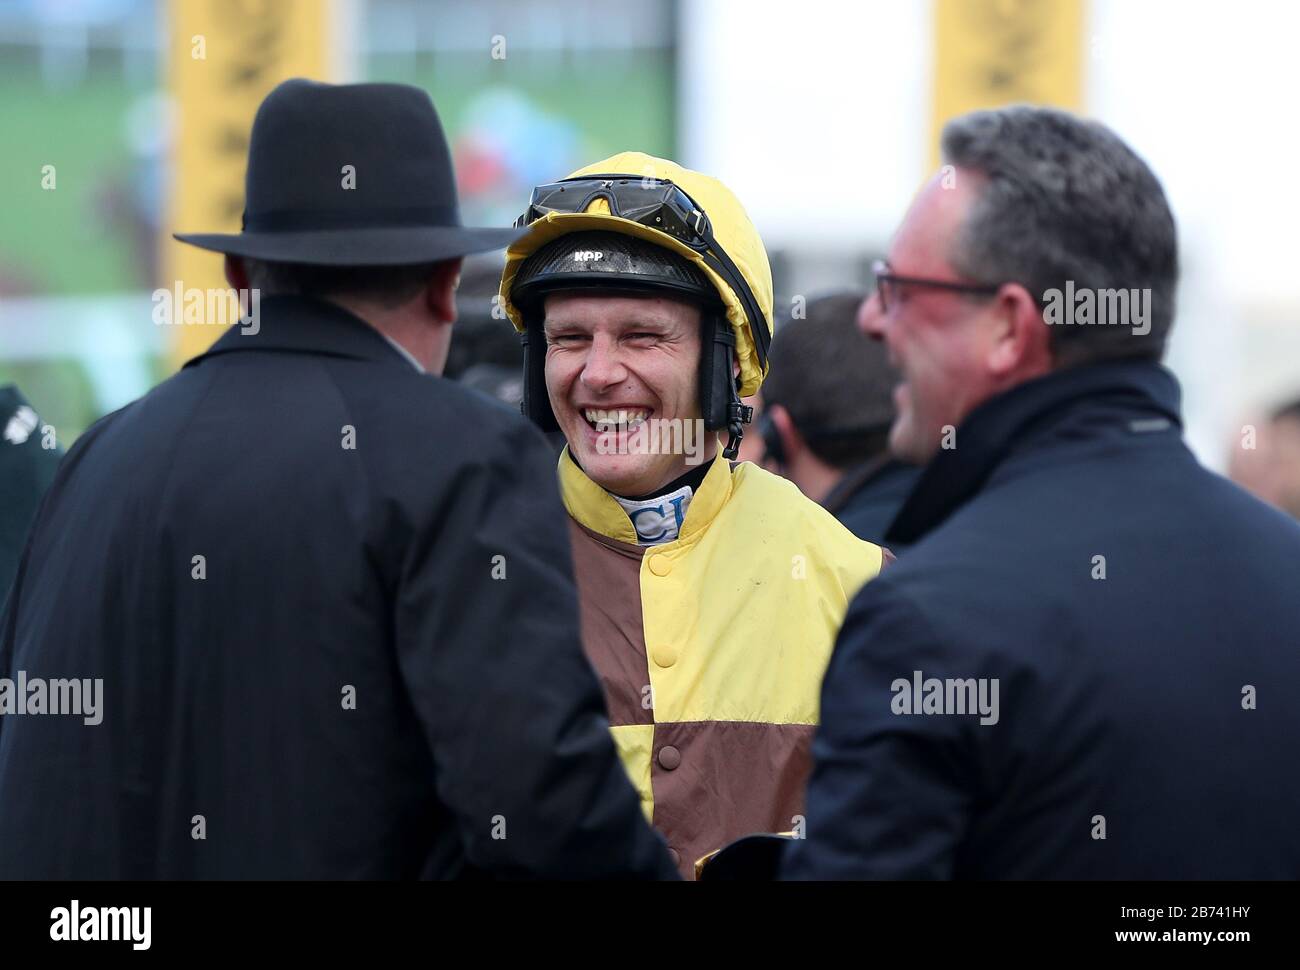 Paul Townend celebrates after Burning Victory won the JCB Triumph Hurdle during day four of the Cheltenham Festival at Cheltenham Racecourse. Stock Photo